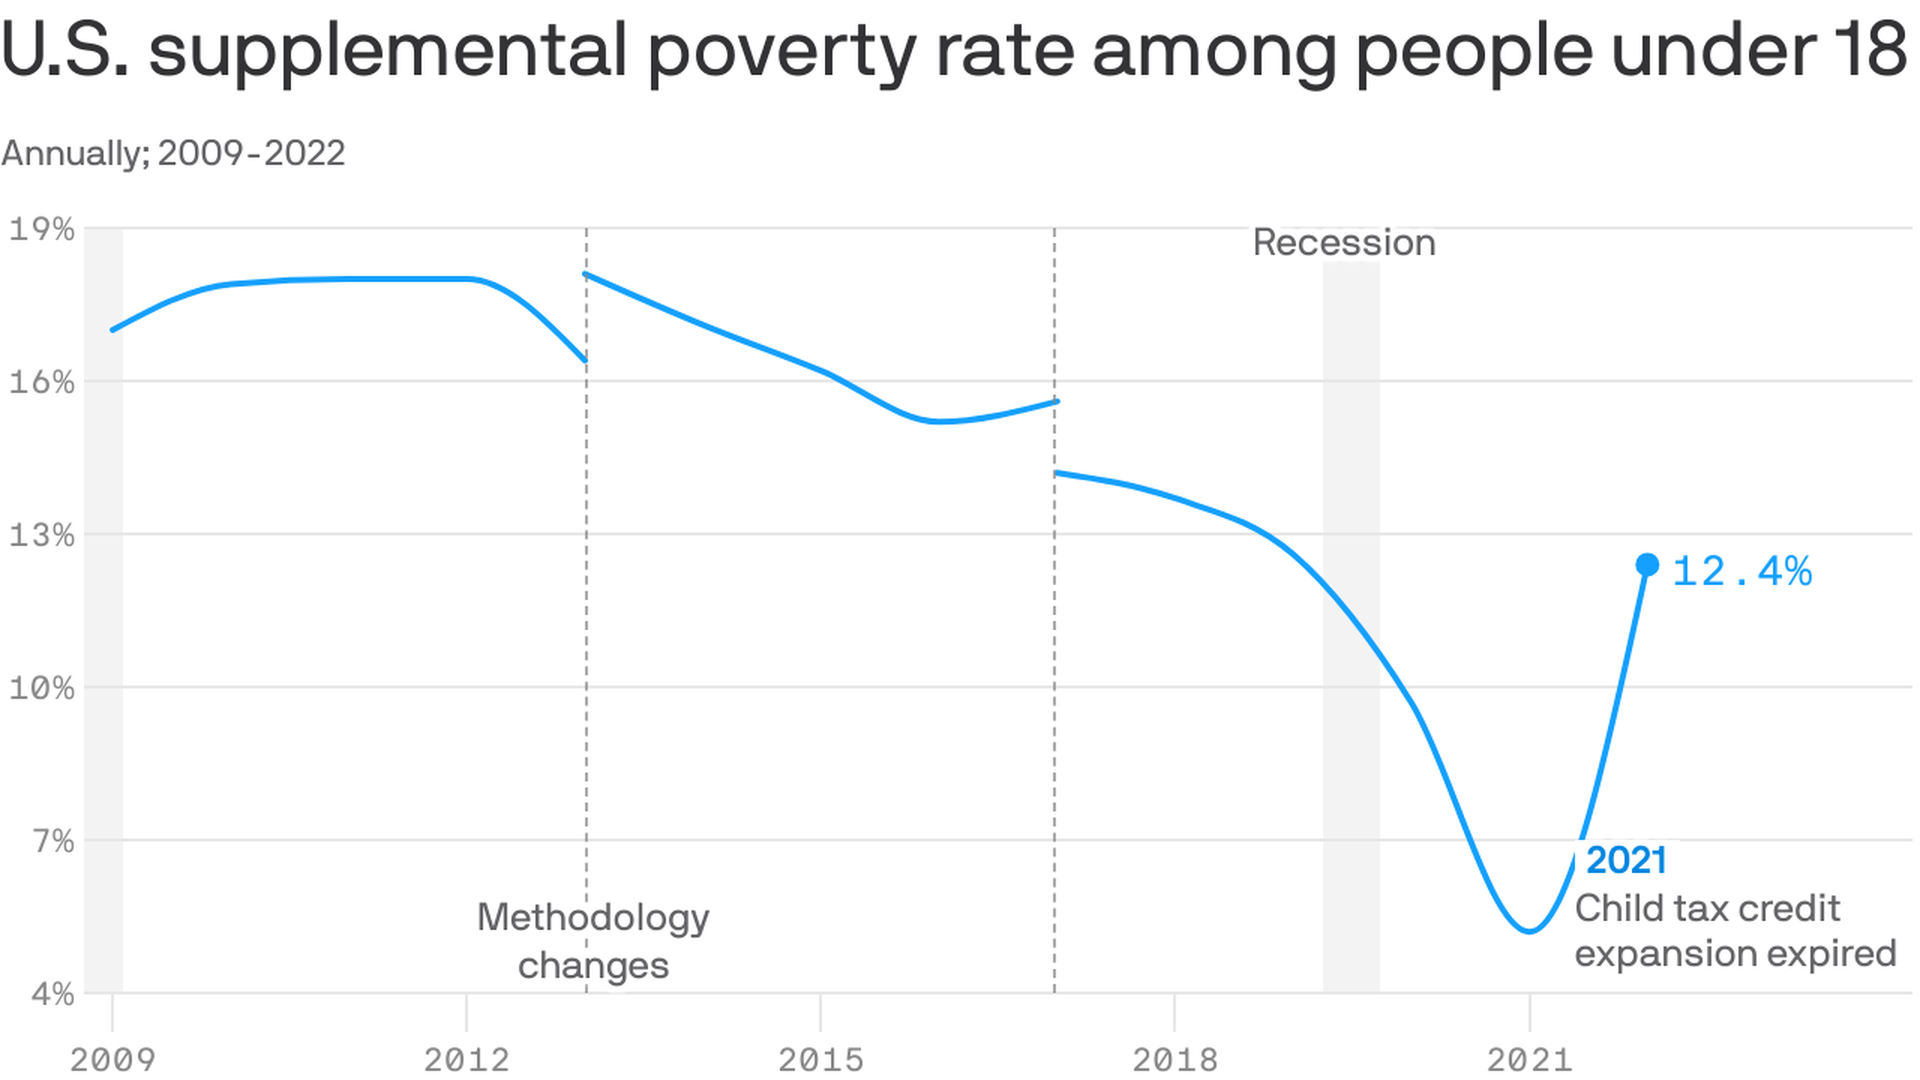 Blue line chart showing the U.S. supplemental poverty rate for people under 18 from 2009 to 2022. It was 17% in 2009 and decreased to 5.2% in 2021. It then went up to 12.4% in 2022.